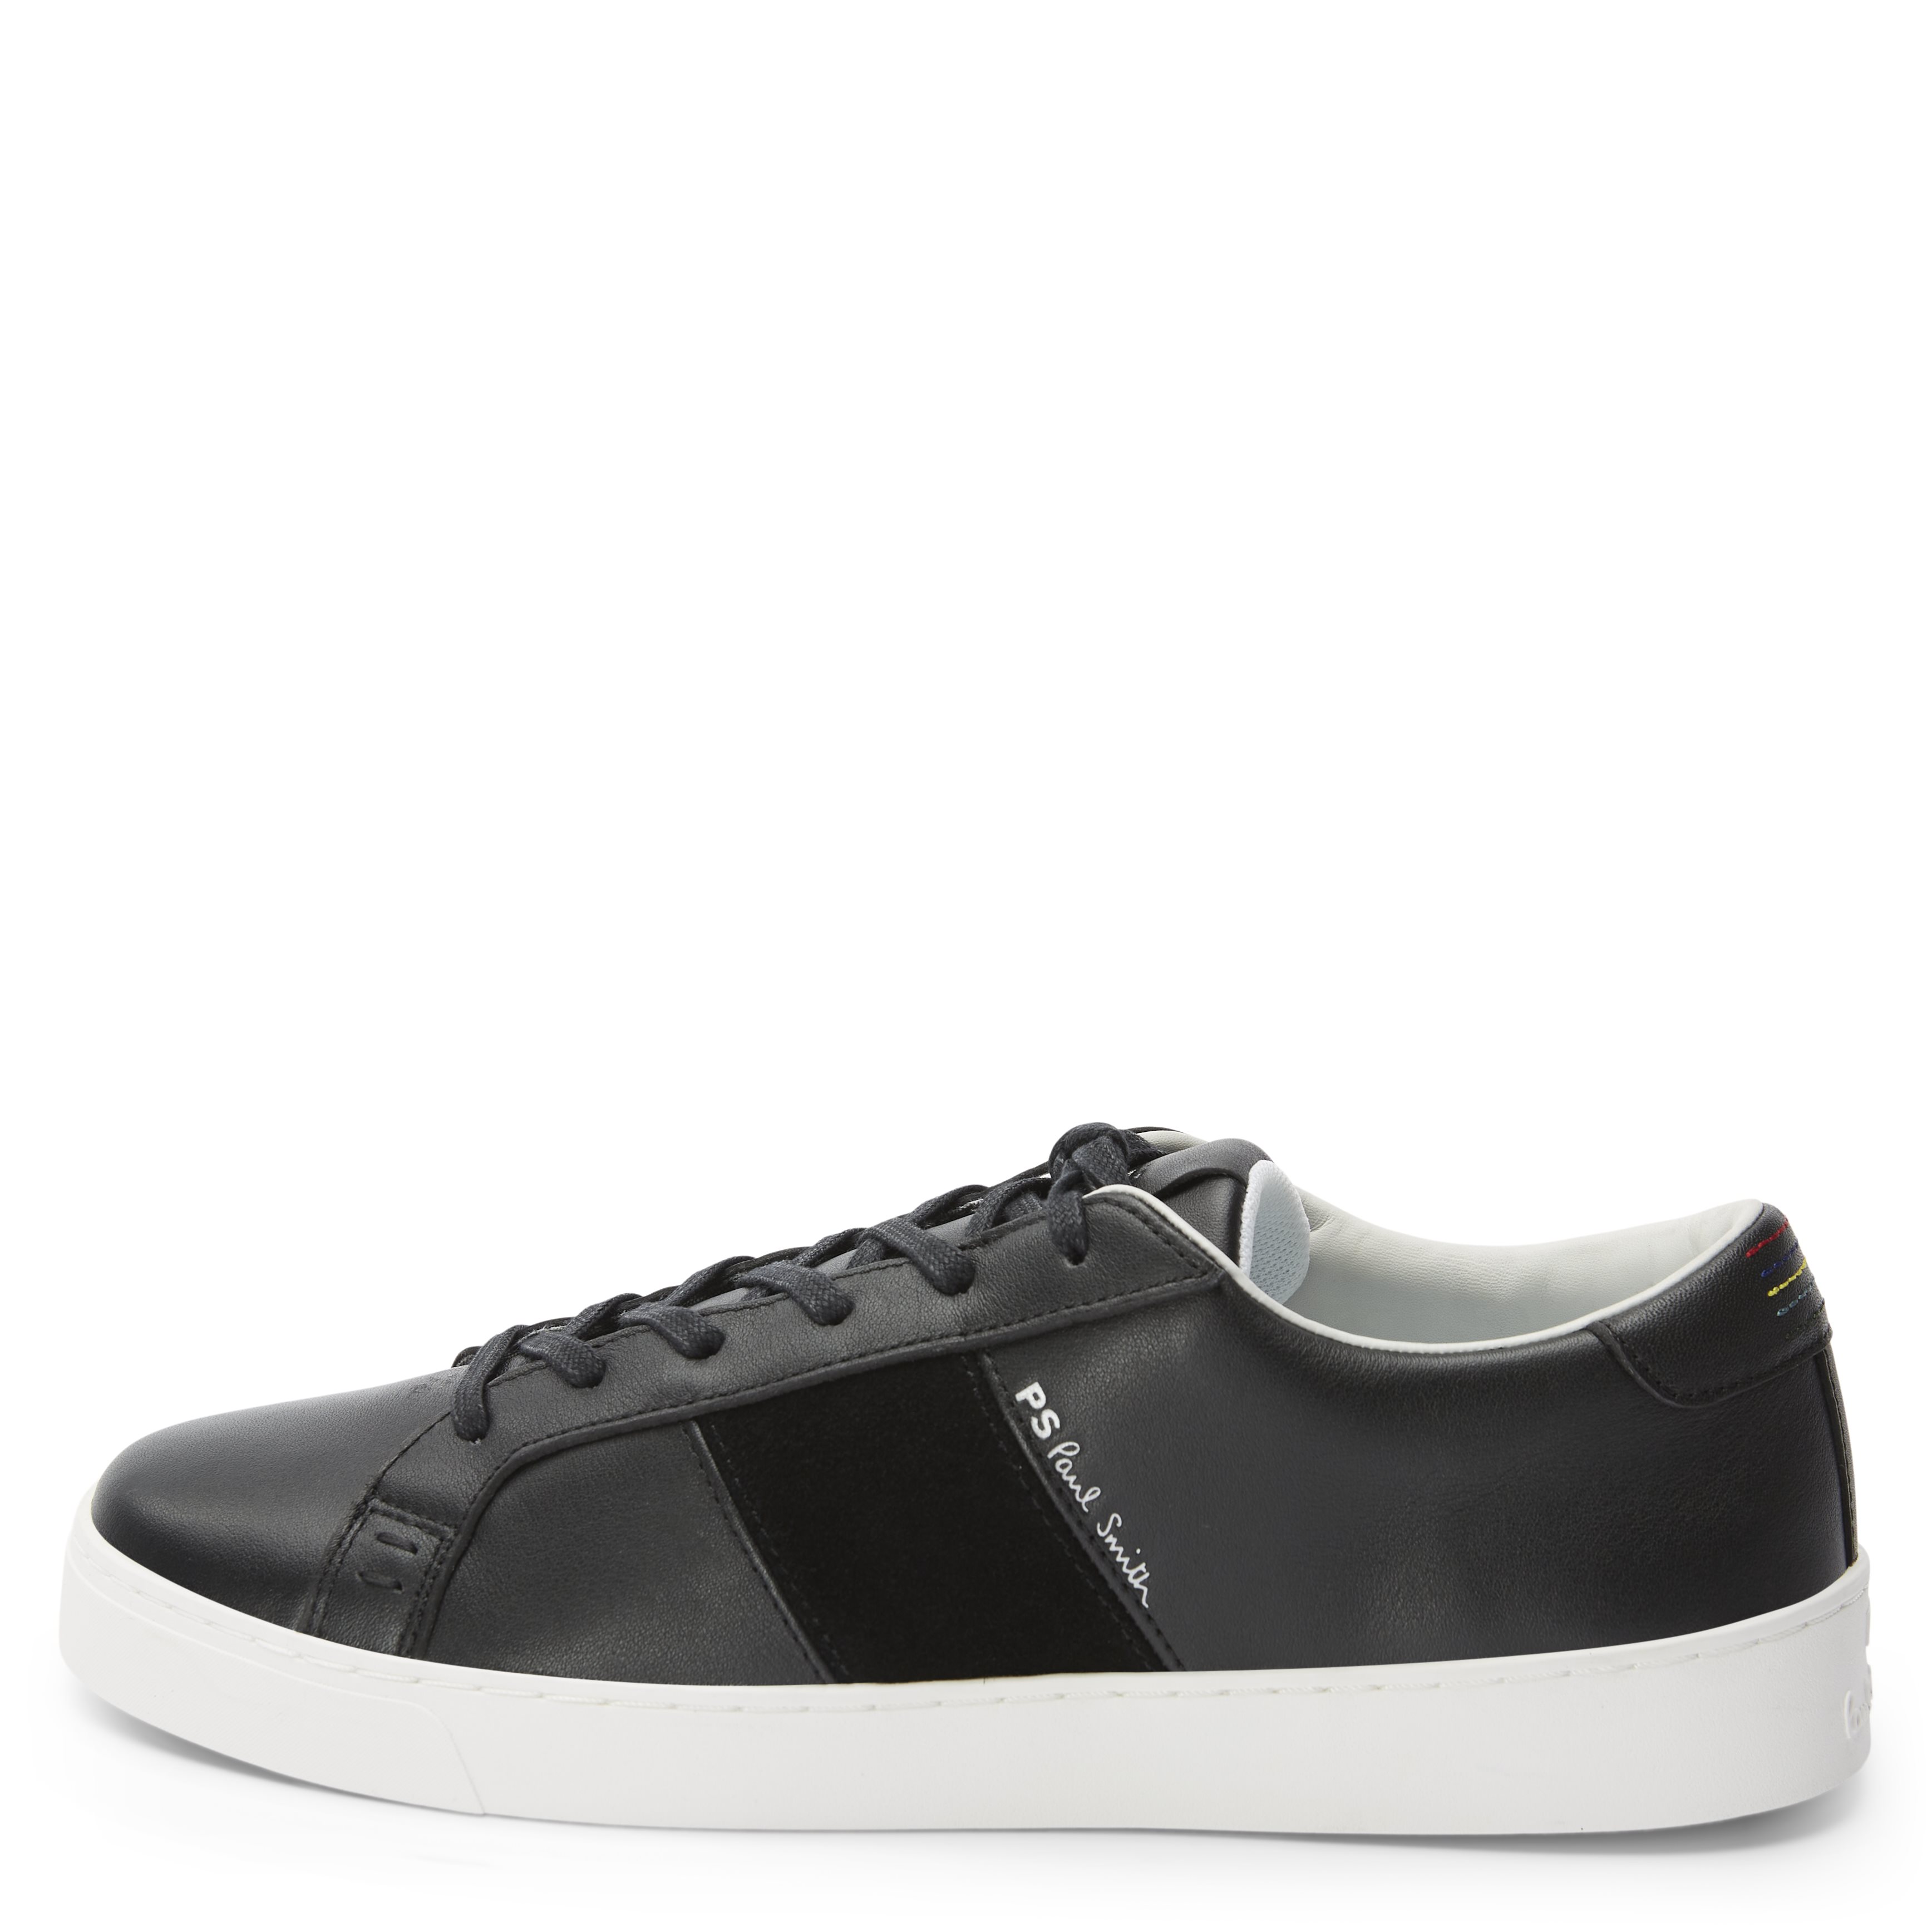 Sneakers - Shoes - Black